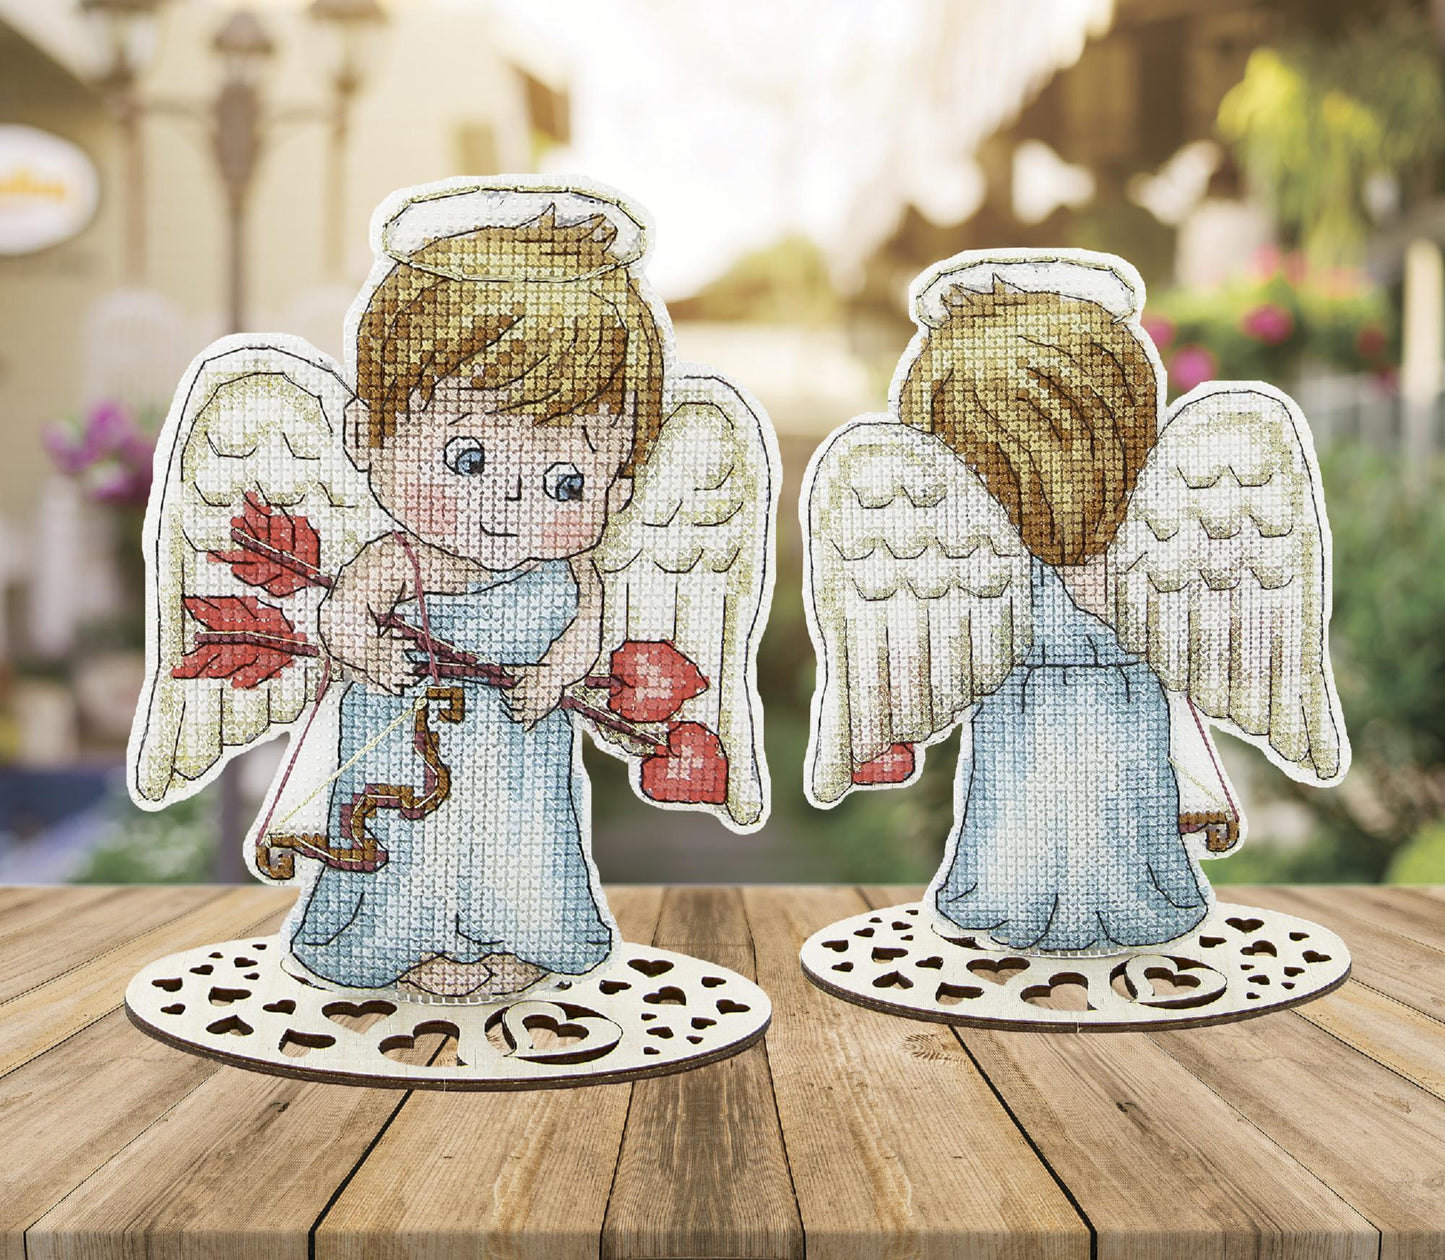 ANGEL "Valentine's Day gift", Counted Cross Stitch Kit, 14 count plastic canvas, size 10 x 13 cm, CRYSTAL ART (T-61)